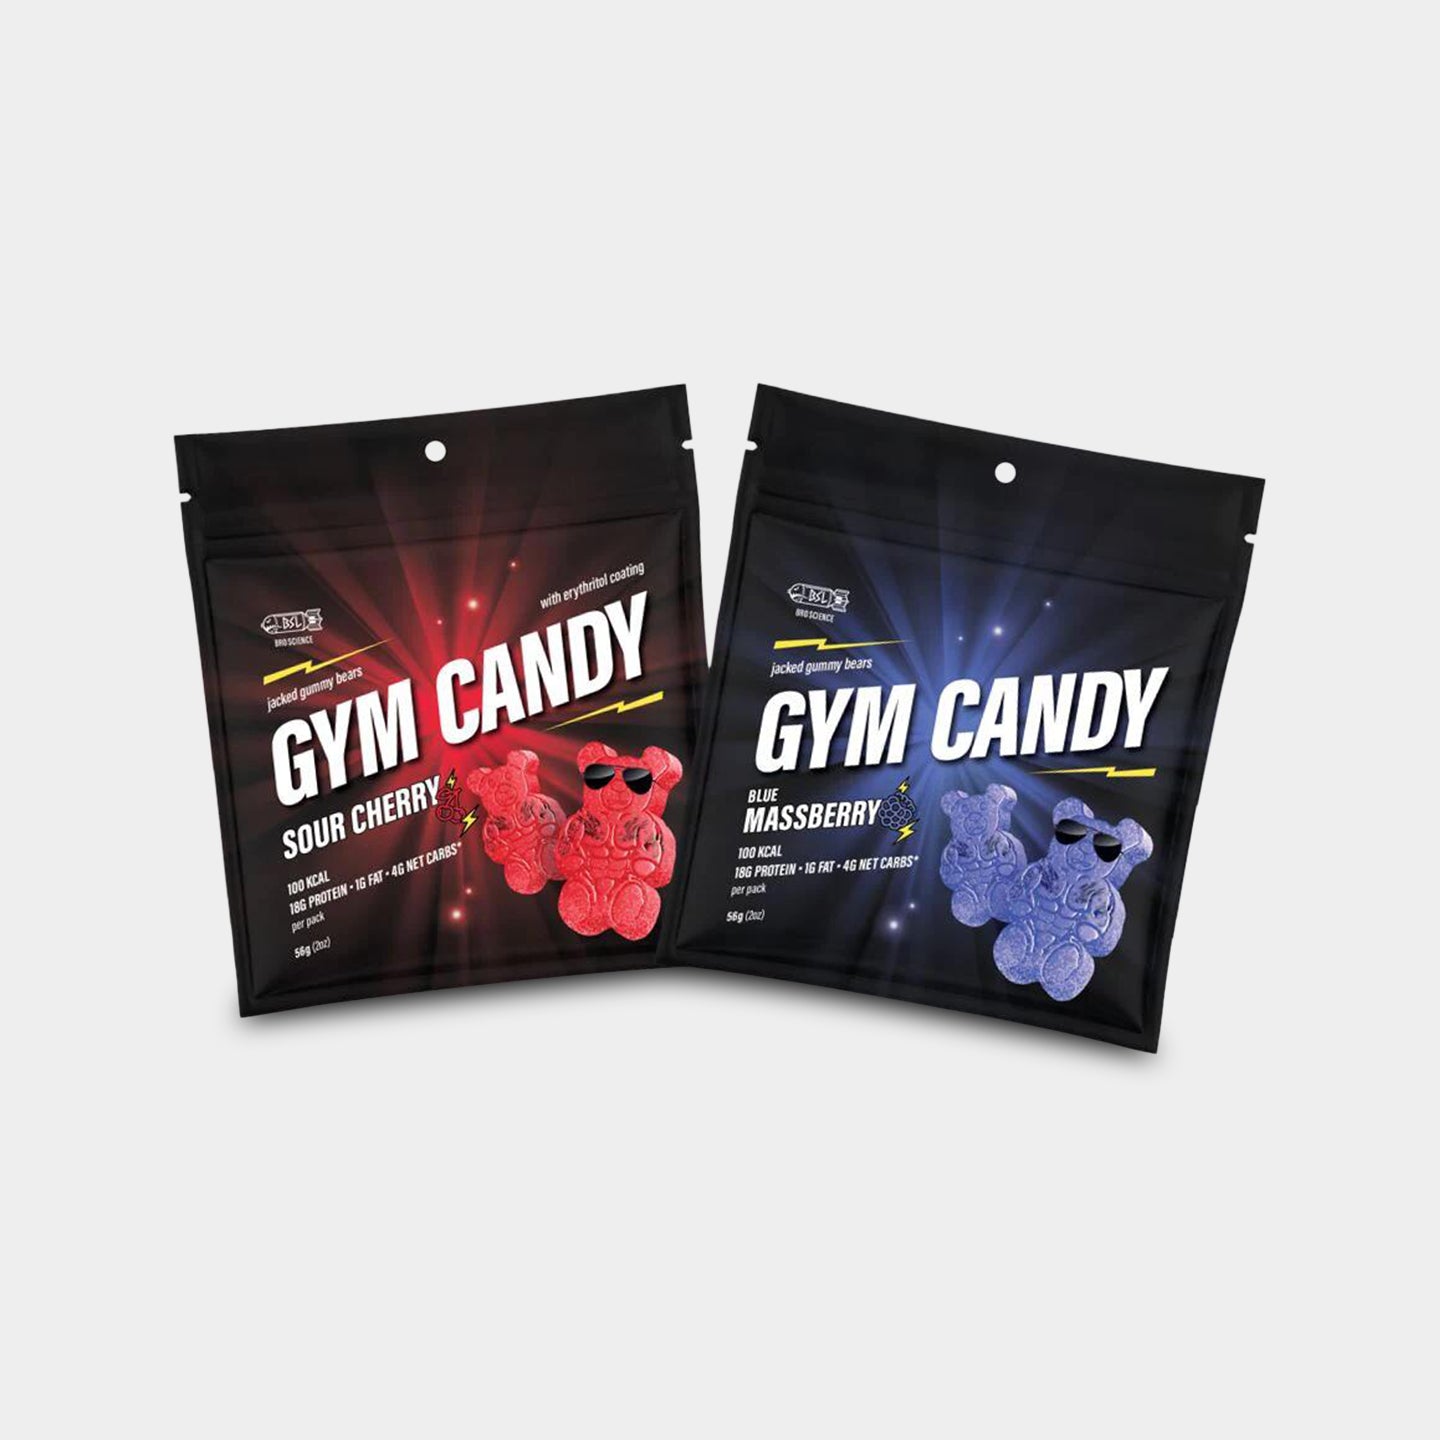 Gym Candy Jacked Gummy Bears, Variety, 2oz - 2 Pack A1